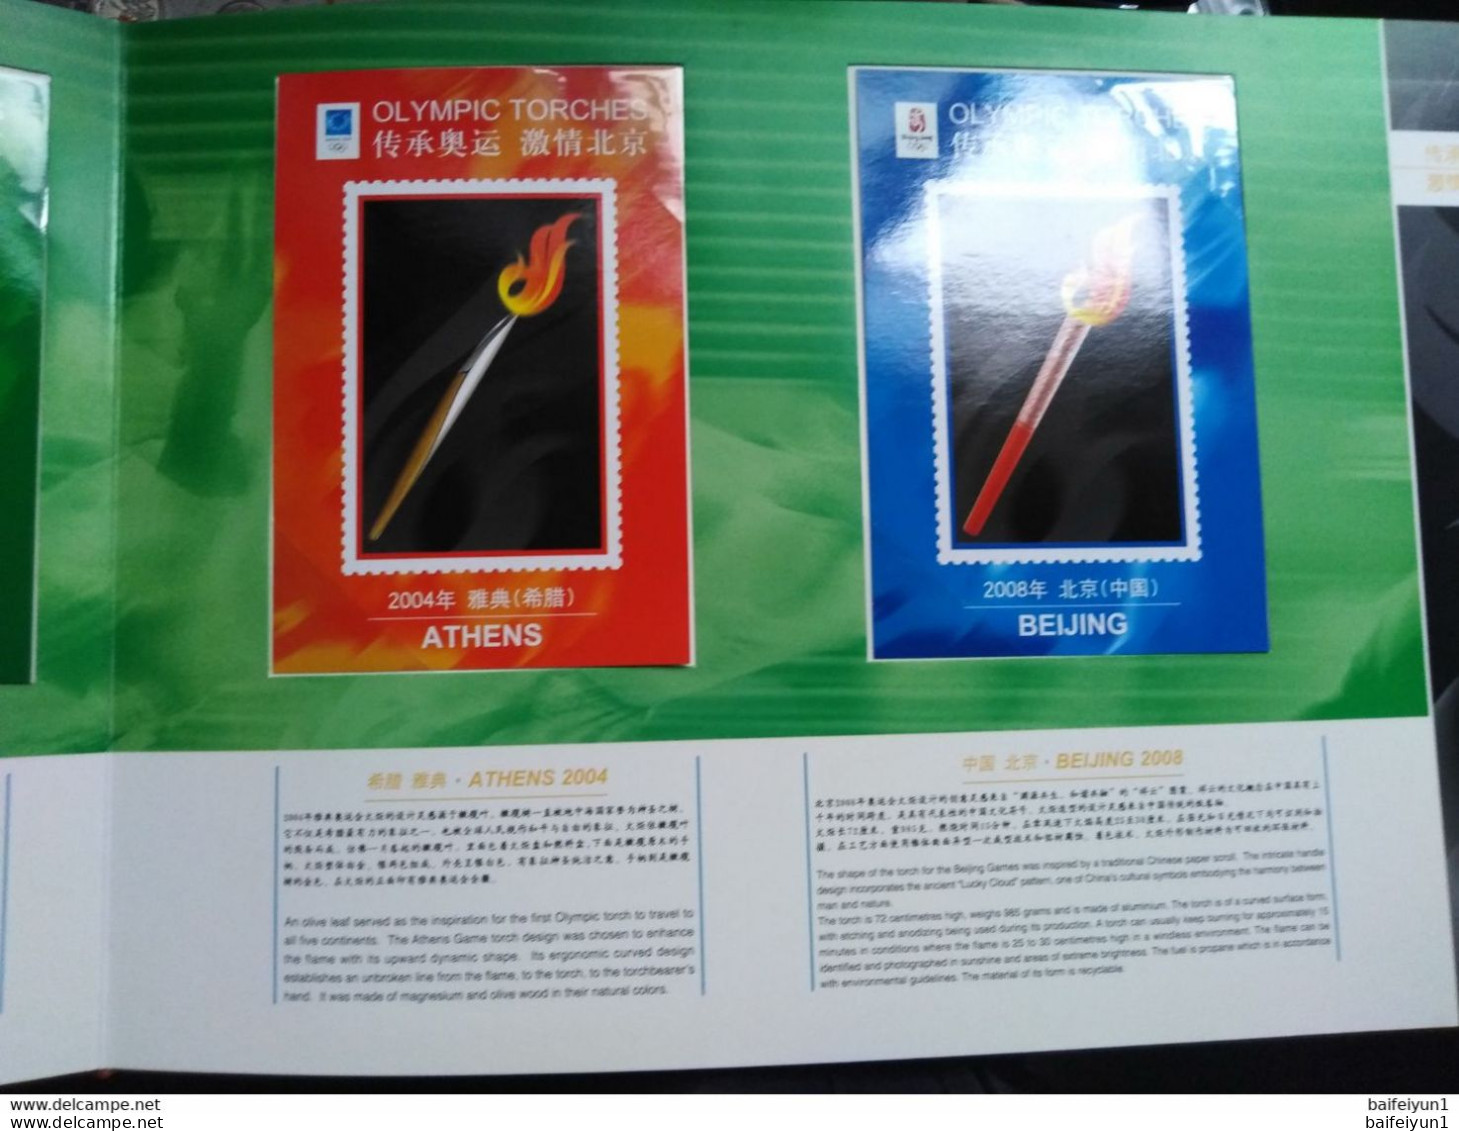 China 2008 Olympic Game Torch From 1936 to 2008 Special sheet album(Rare only 10000)